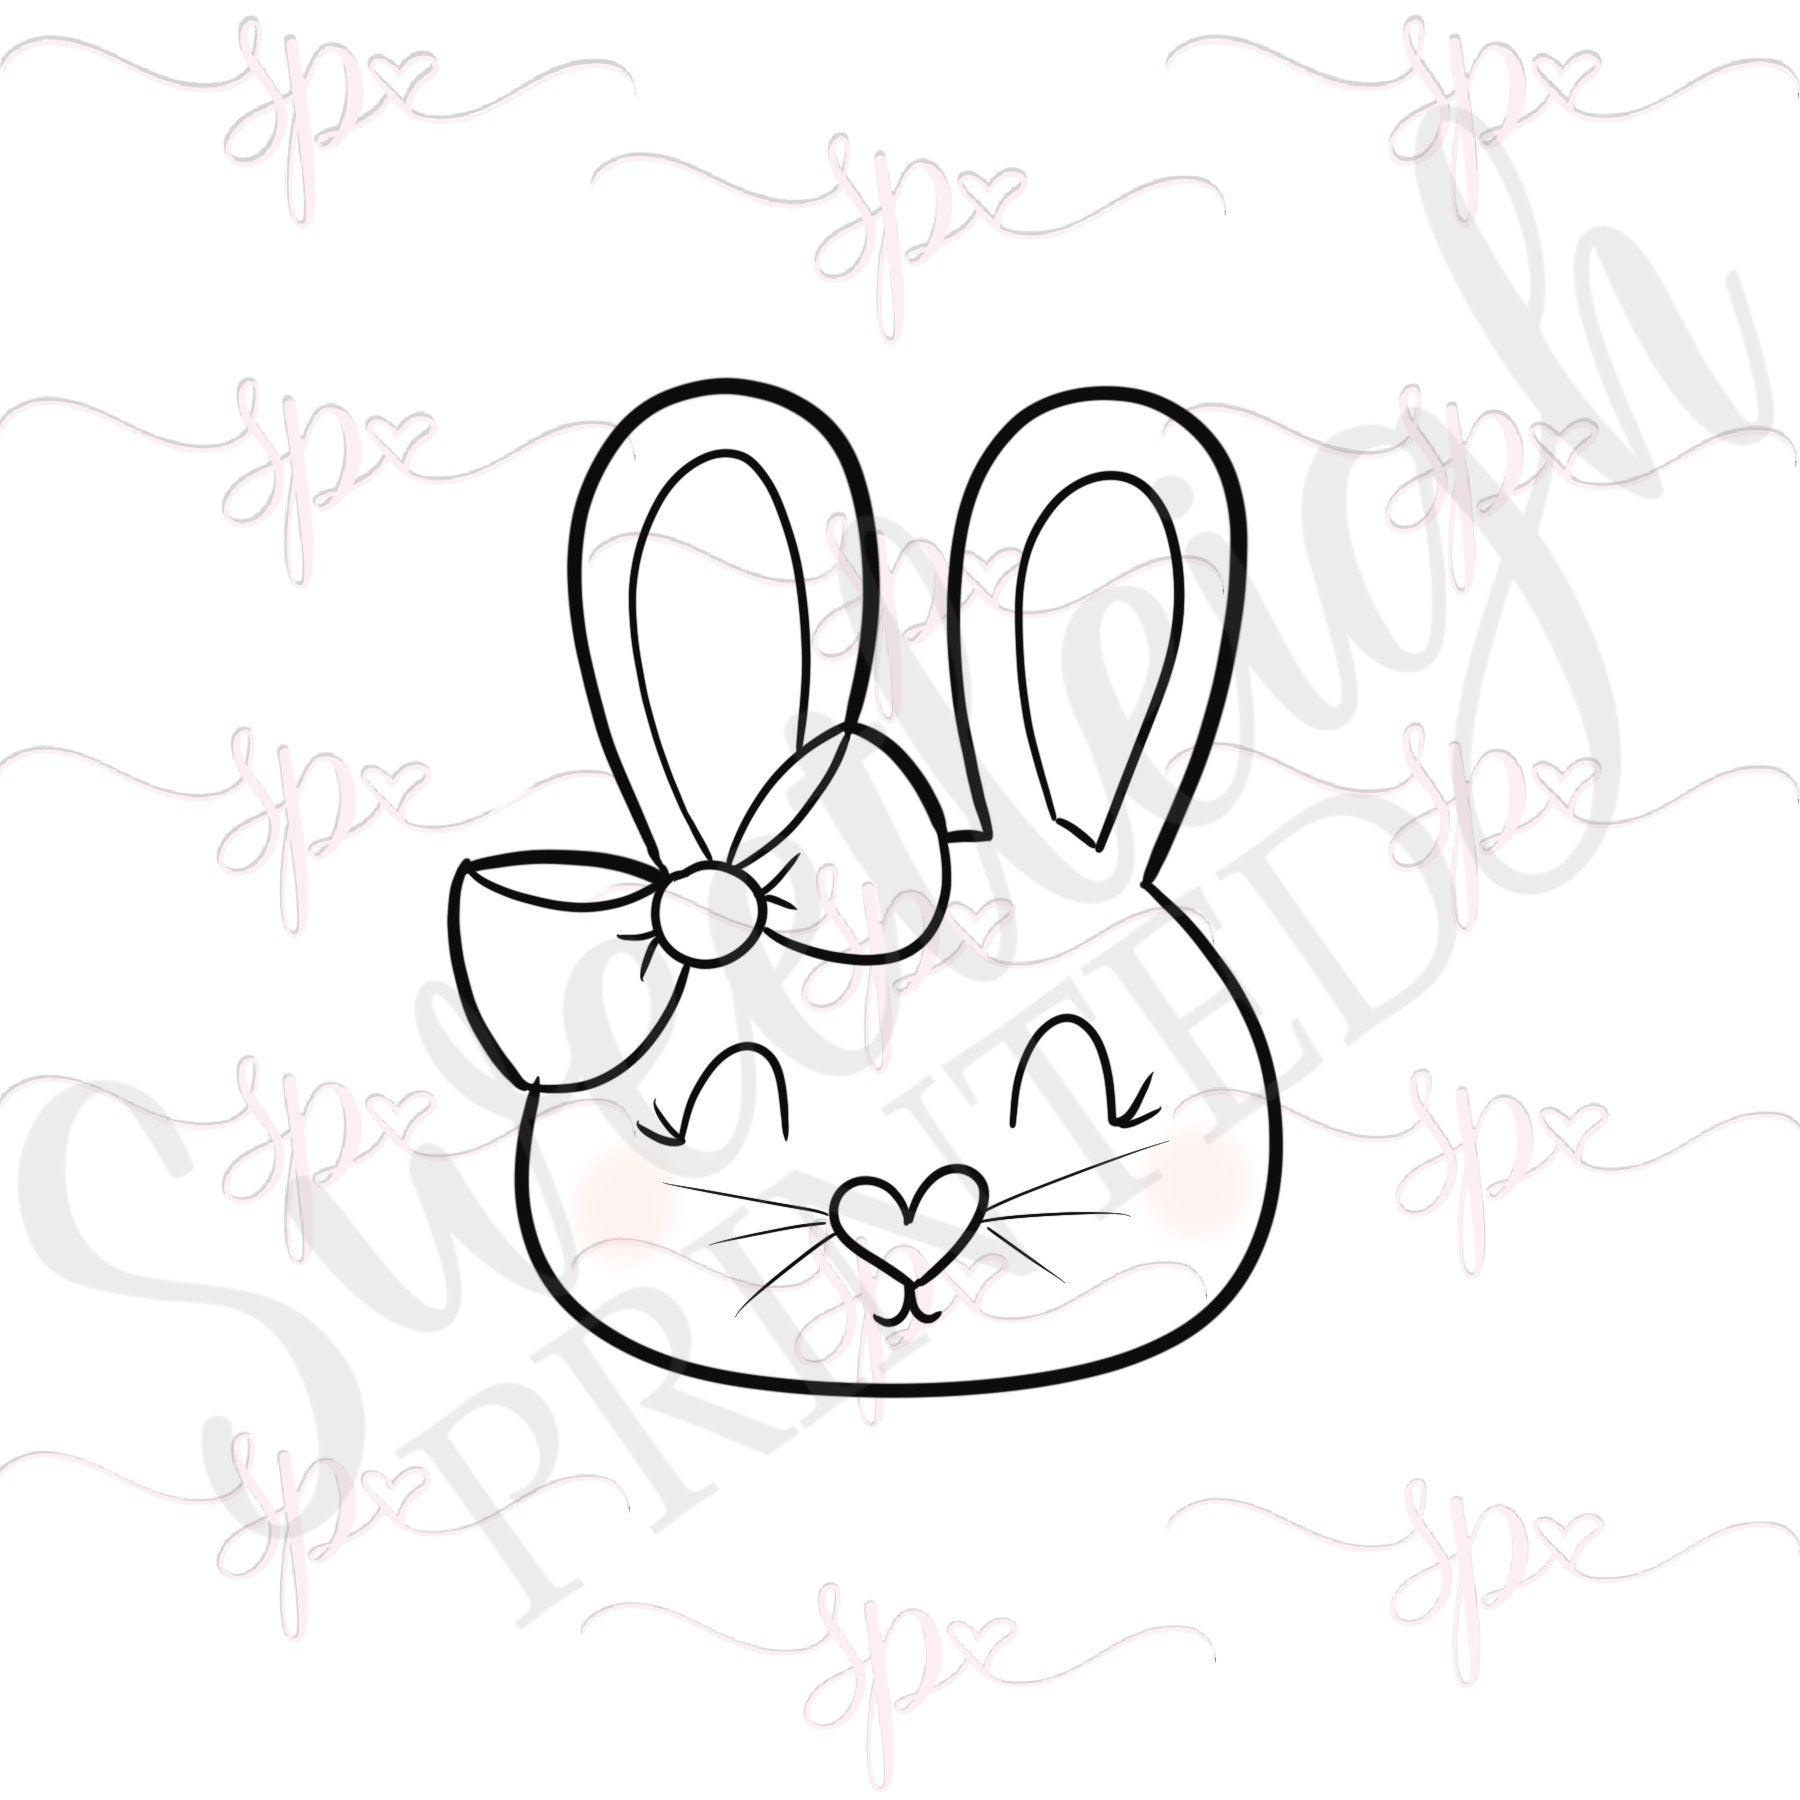 Girly Bunny Head Cookie Cutter - Sweetleigh 